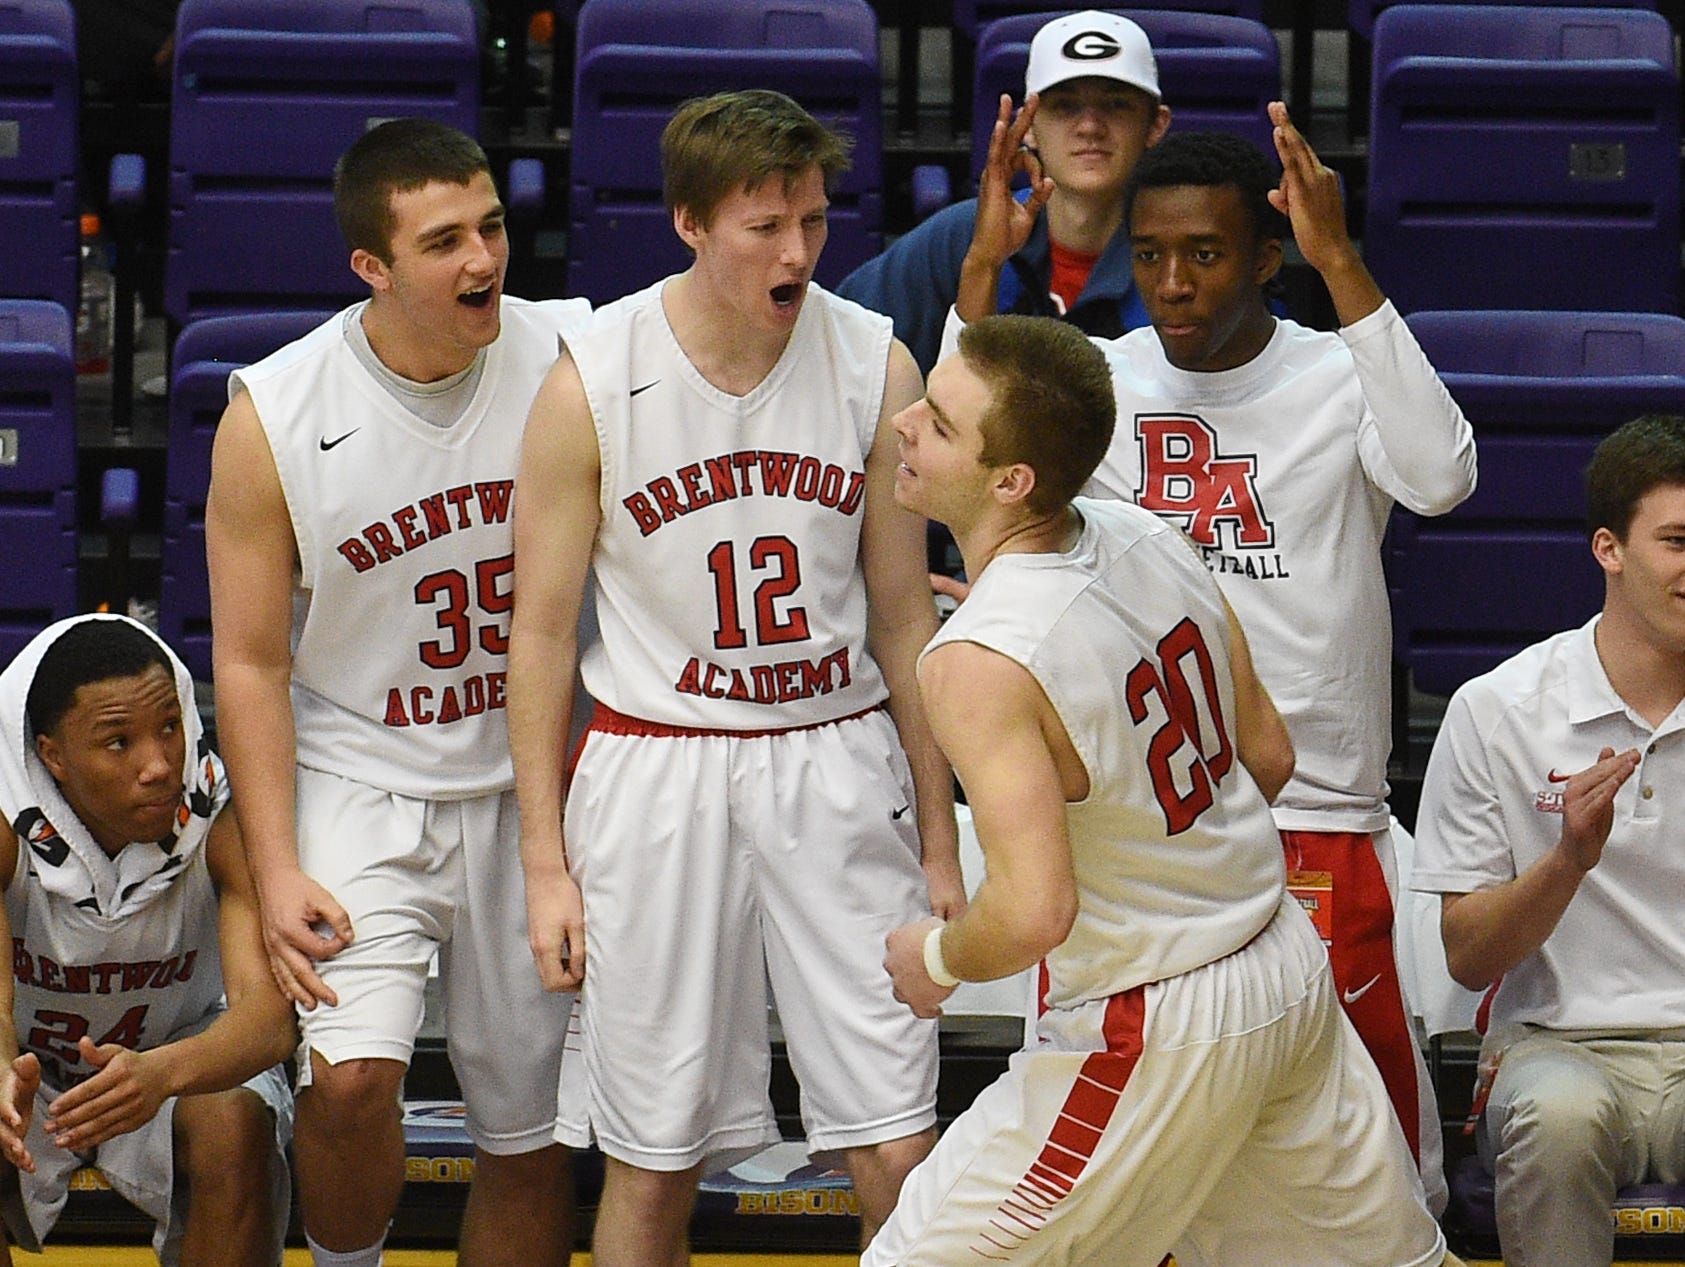 Brentwood Academy celebrates after Jeremiah Oatawall (20) scores during the TSSAA DII-AA semifinals at Lipscomb University on March 4, 2016.